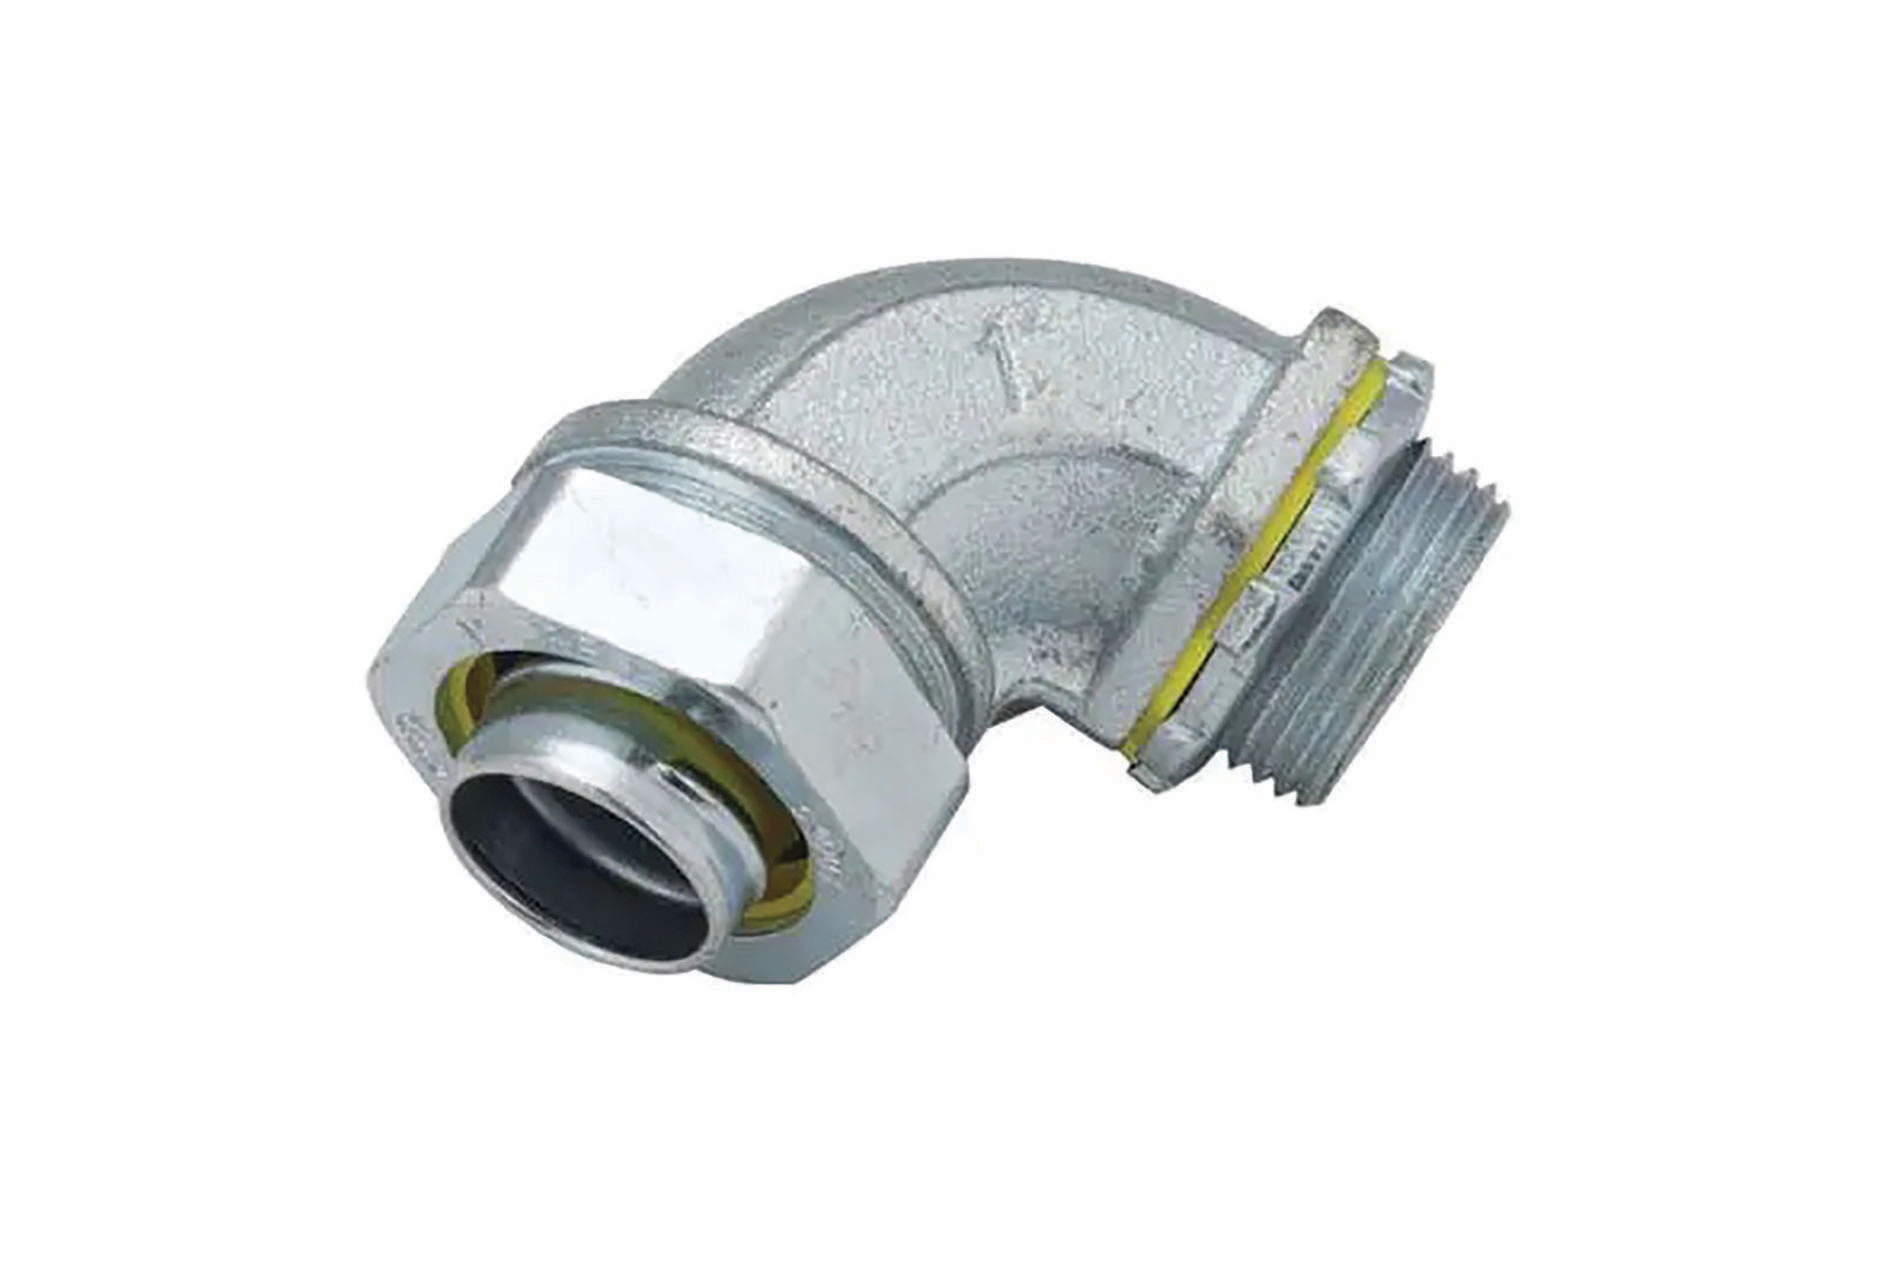 Metal 90-degree connector. Image by Raco.